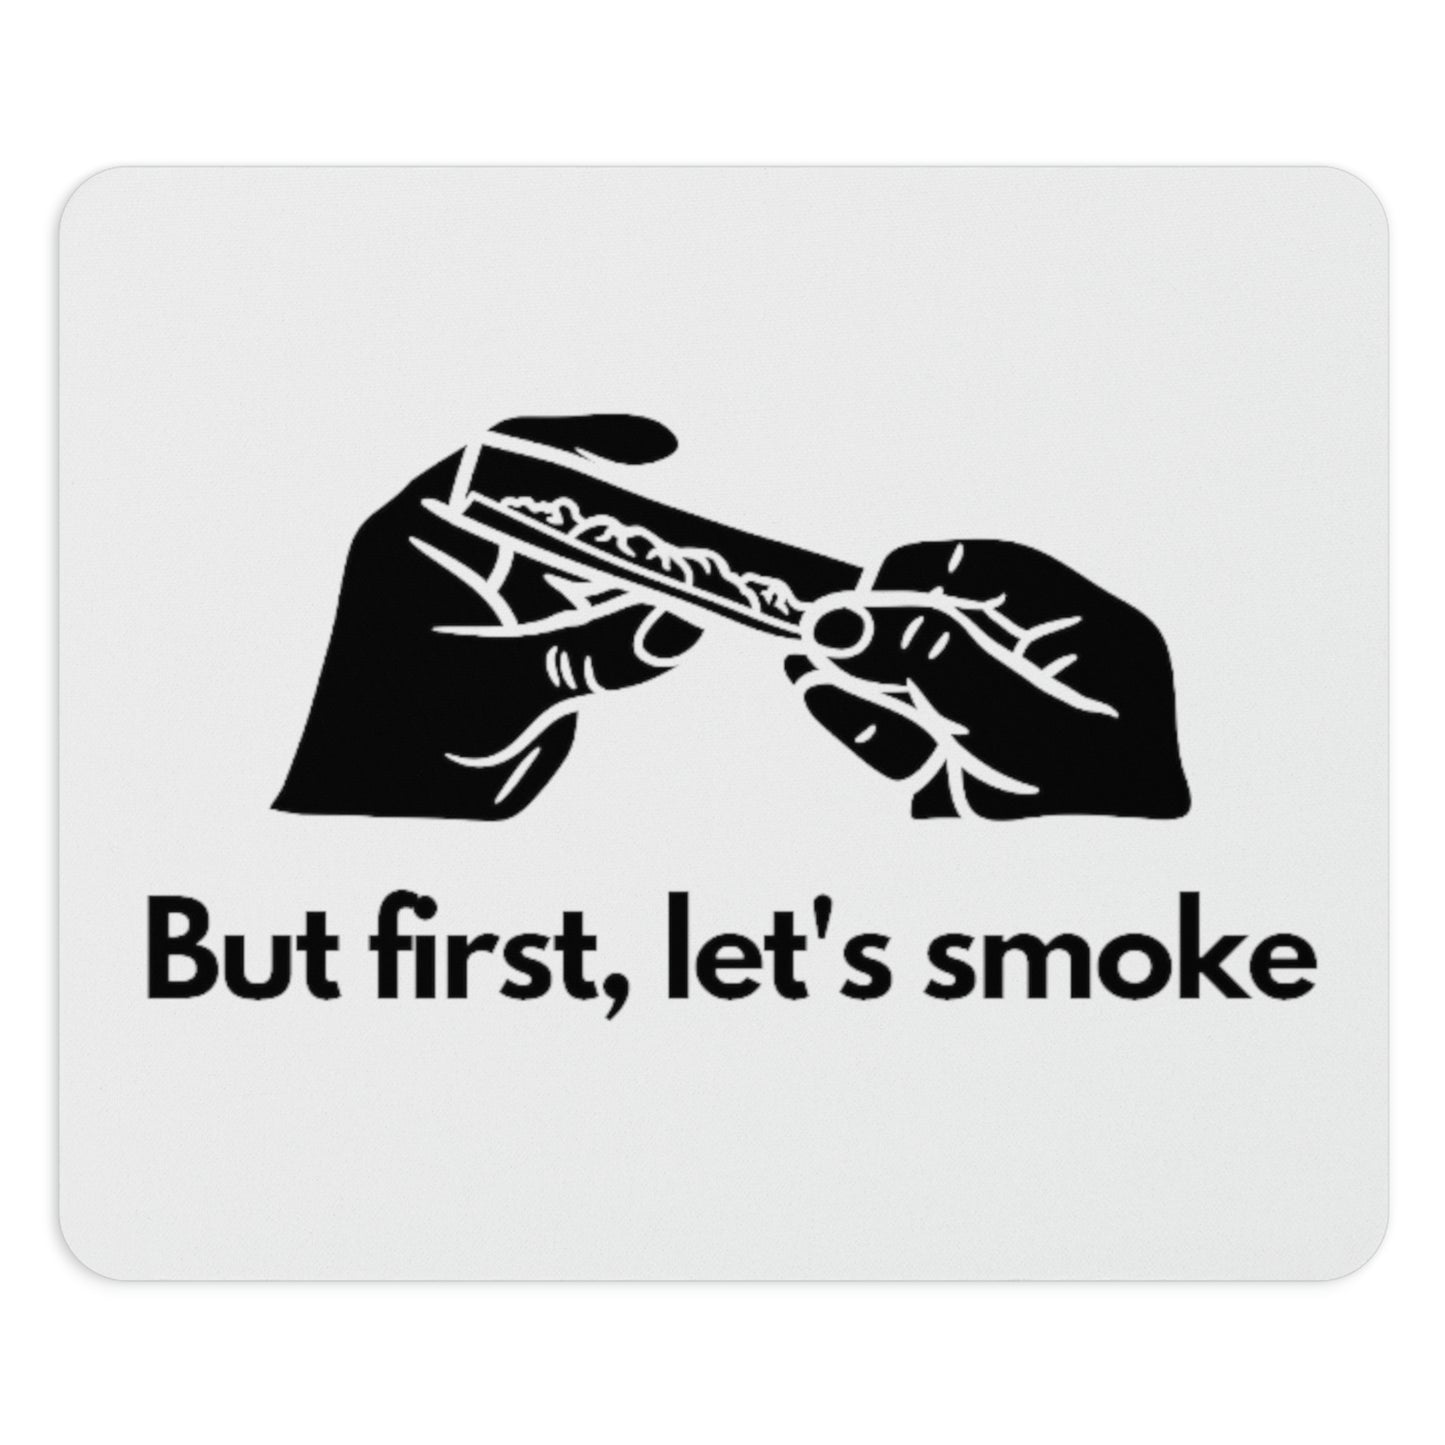 But first let's smoke the "But First, Let's Smoke Weed Mouse Pad".